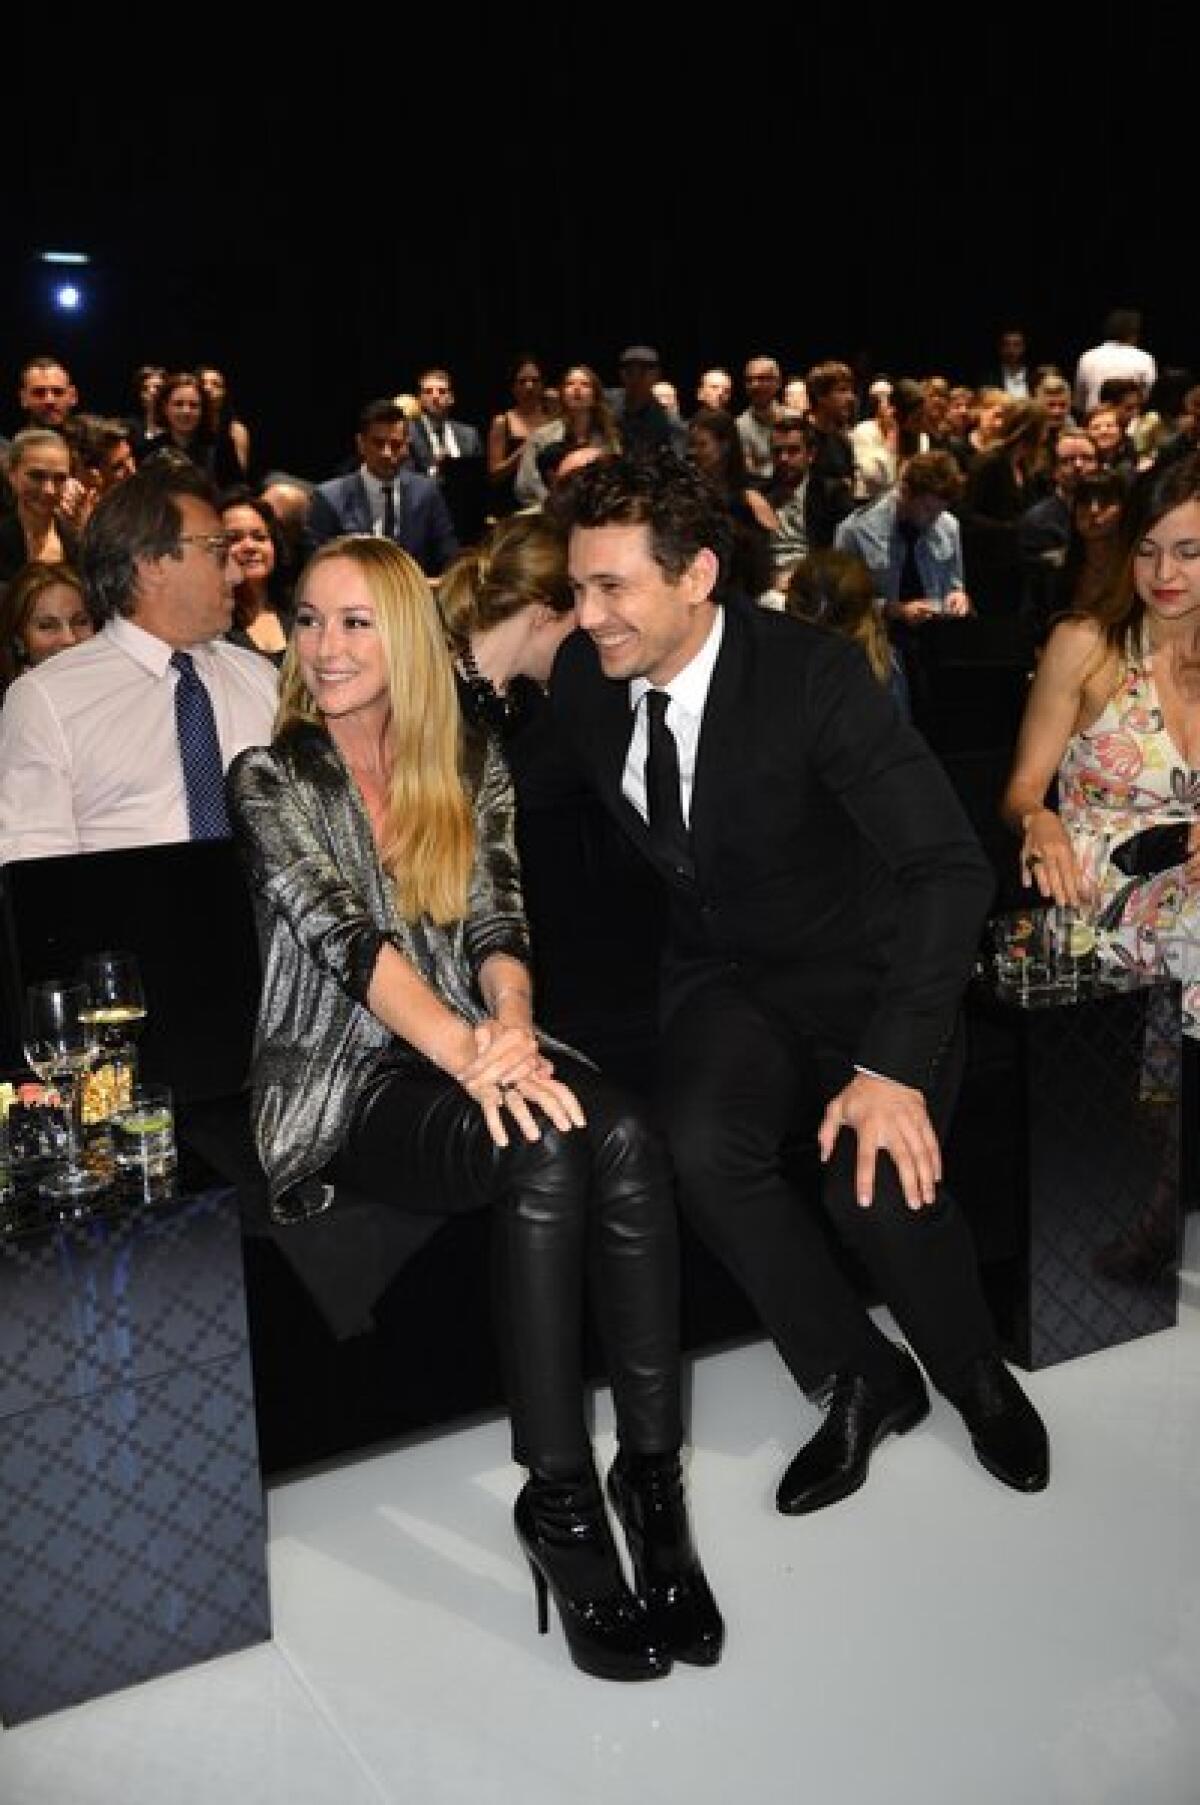 Gucci's Frida Giannini and James Franco attend the Gucci Made to Measure launch in Milan.